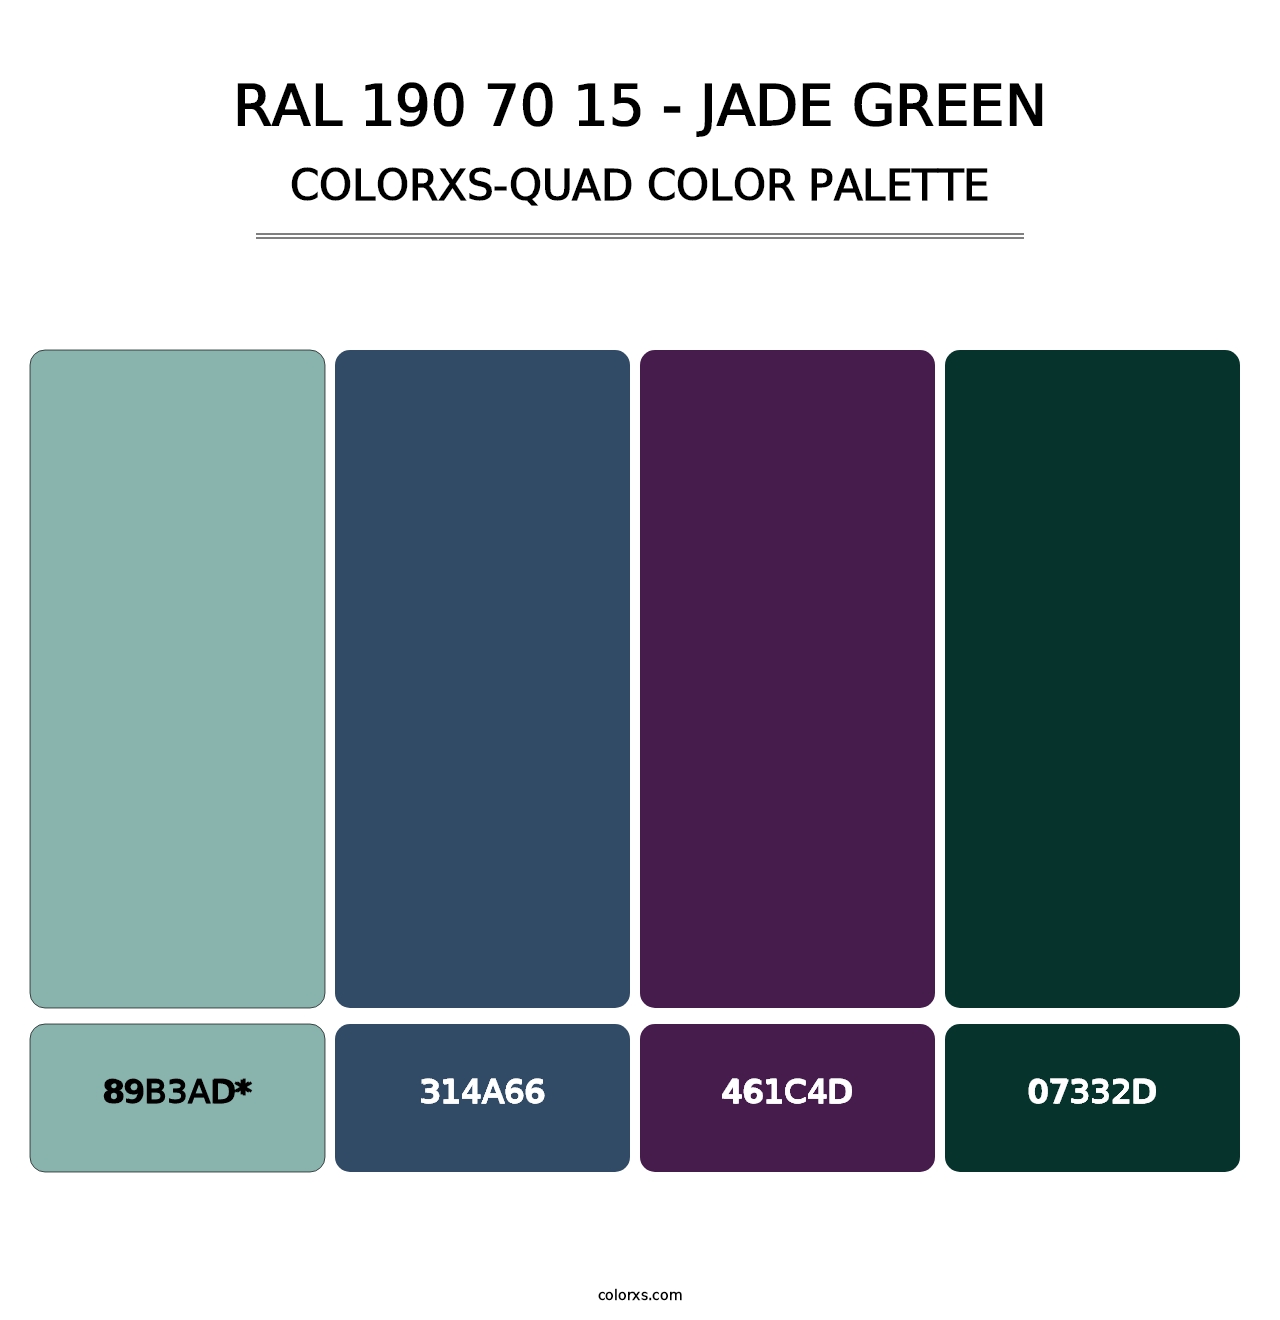 RAL 190 70 15 - Jade Green - Colorxs Quad Palette